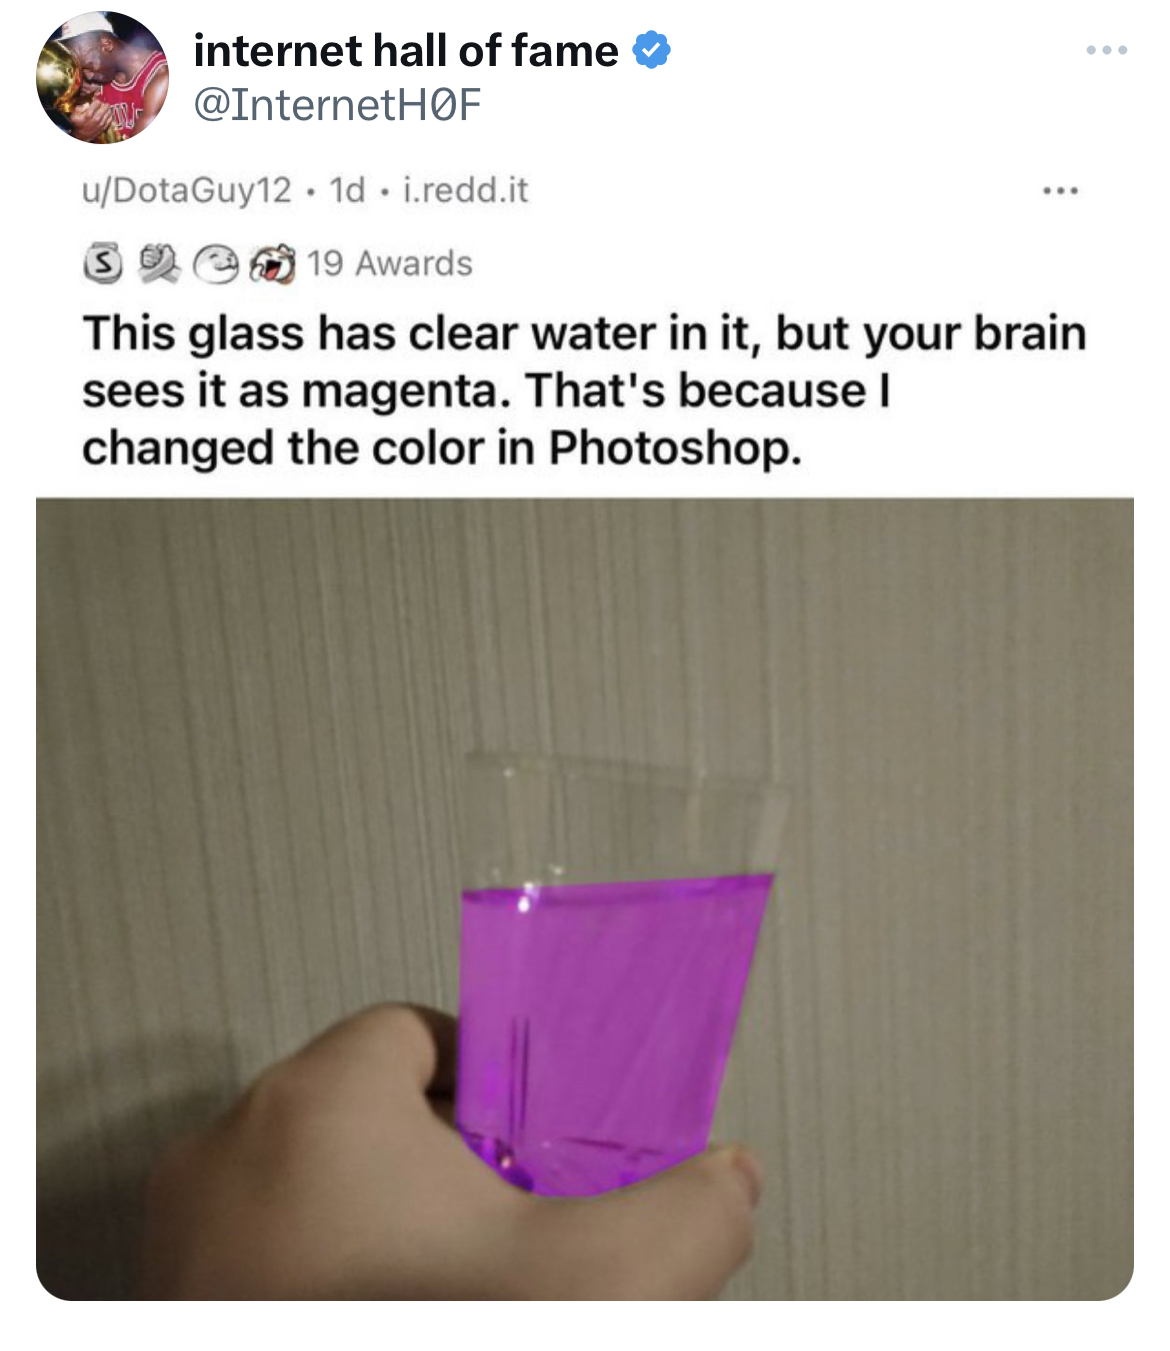 Tweets of the week - water - internet hall of fame uDotaGuy12. 1d. i.redd.it 19 Awards This glass has clear water in it, but your brain sees it as magenta. That's because I changed the color in Photoshop.